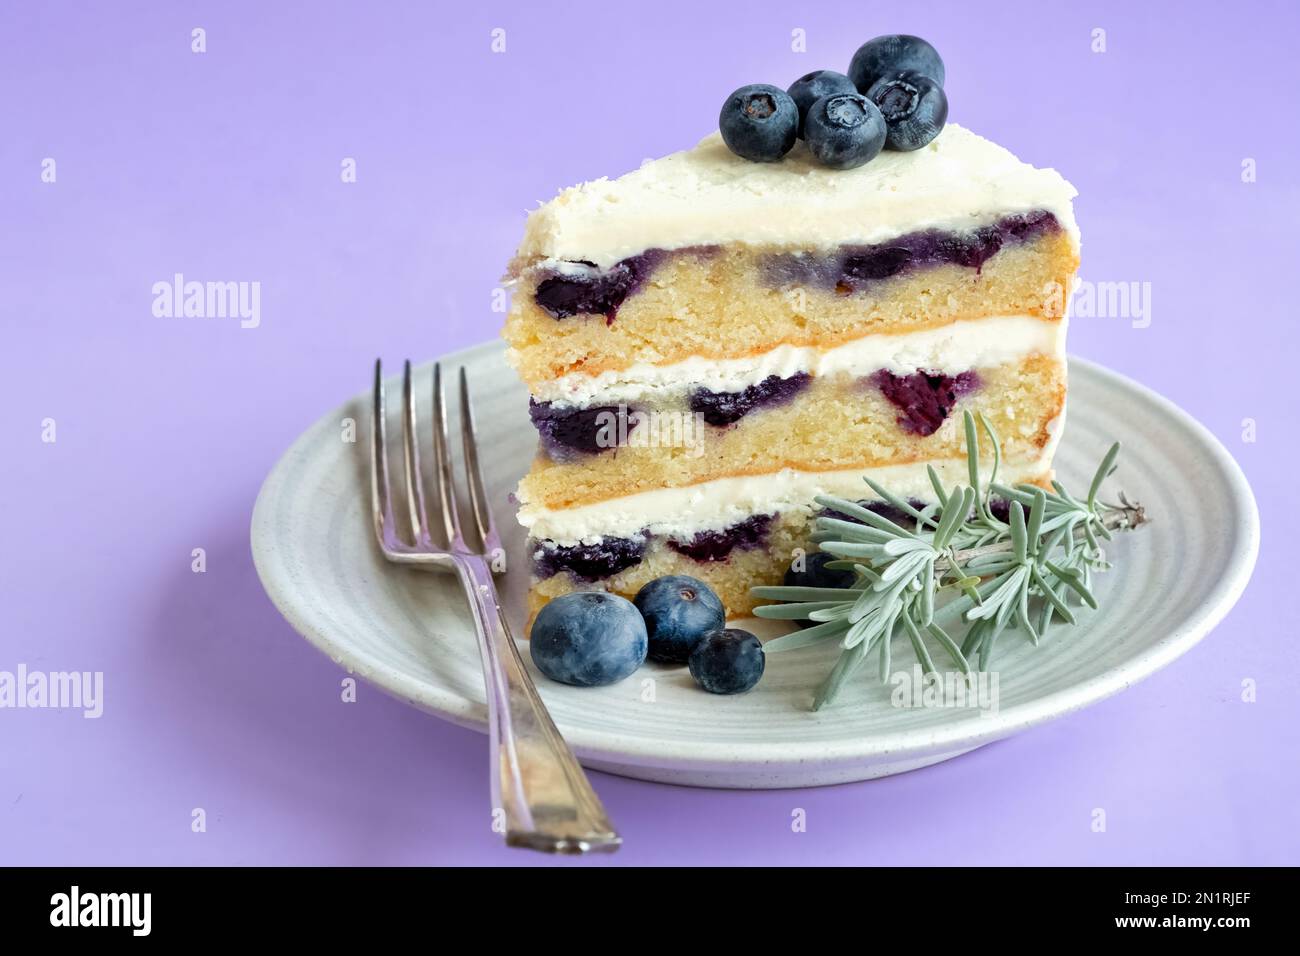 A portion served plated of a three tiered white chocolate, blueberry and lavender cake. A showstopper bake covered in cream cheese frosting Stock Photo